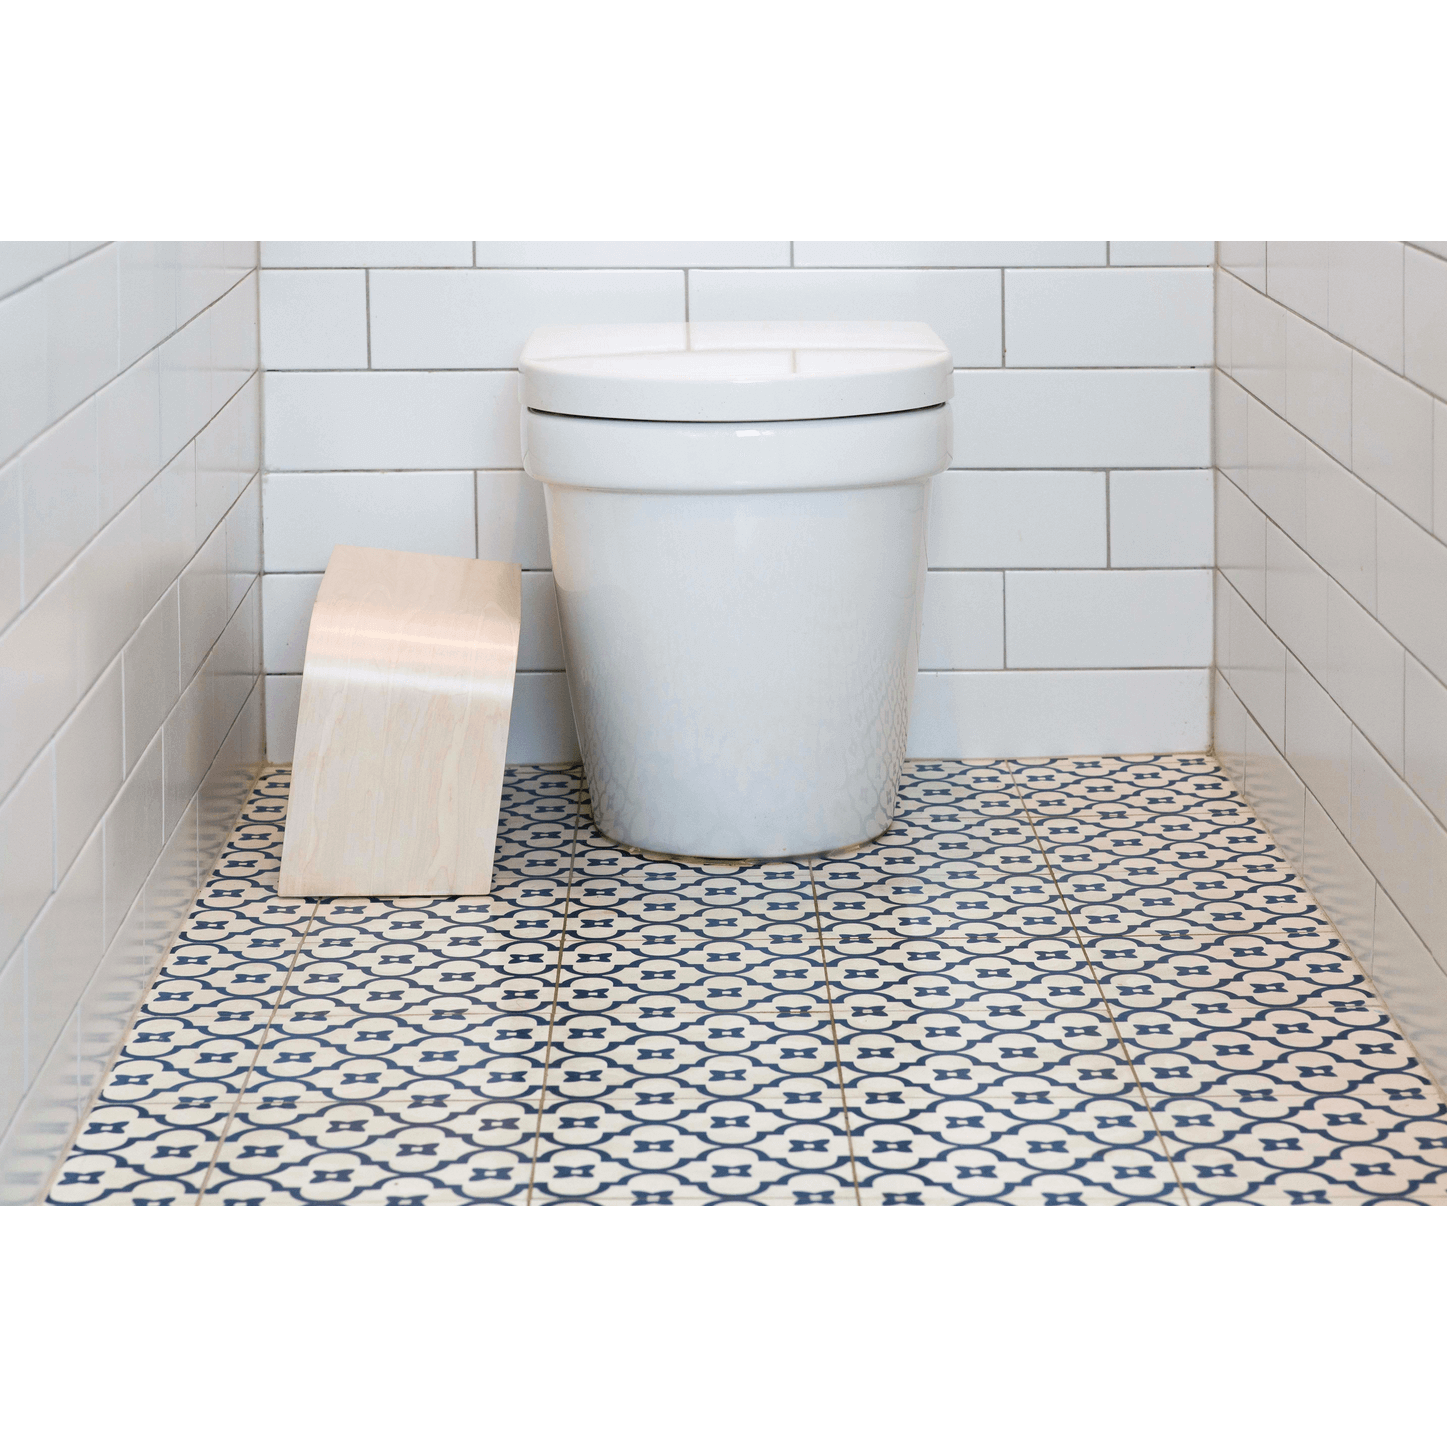 The PROPPR Timber - Whitewash Toilet Foot Stool - side view in a bathroom beside a toilet